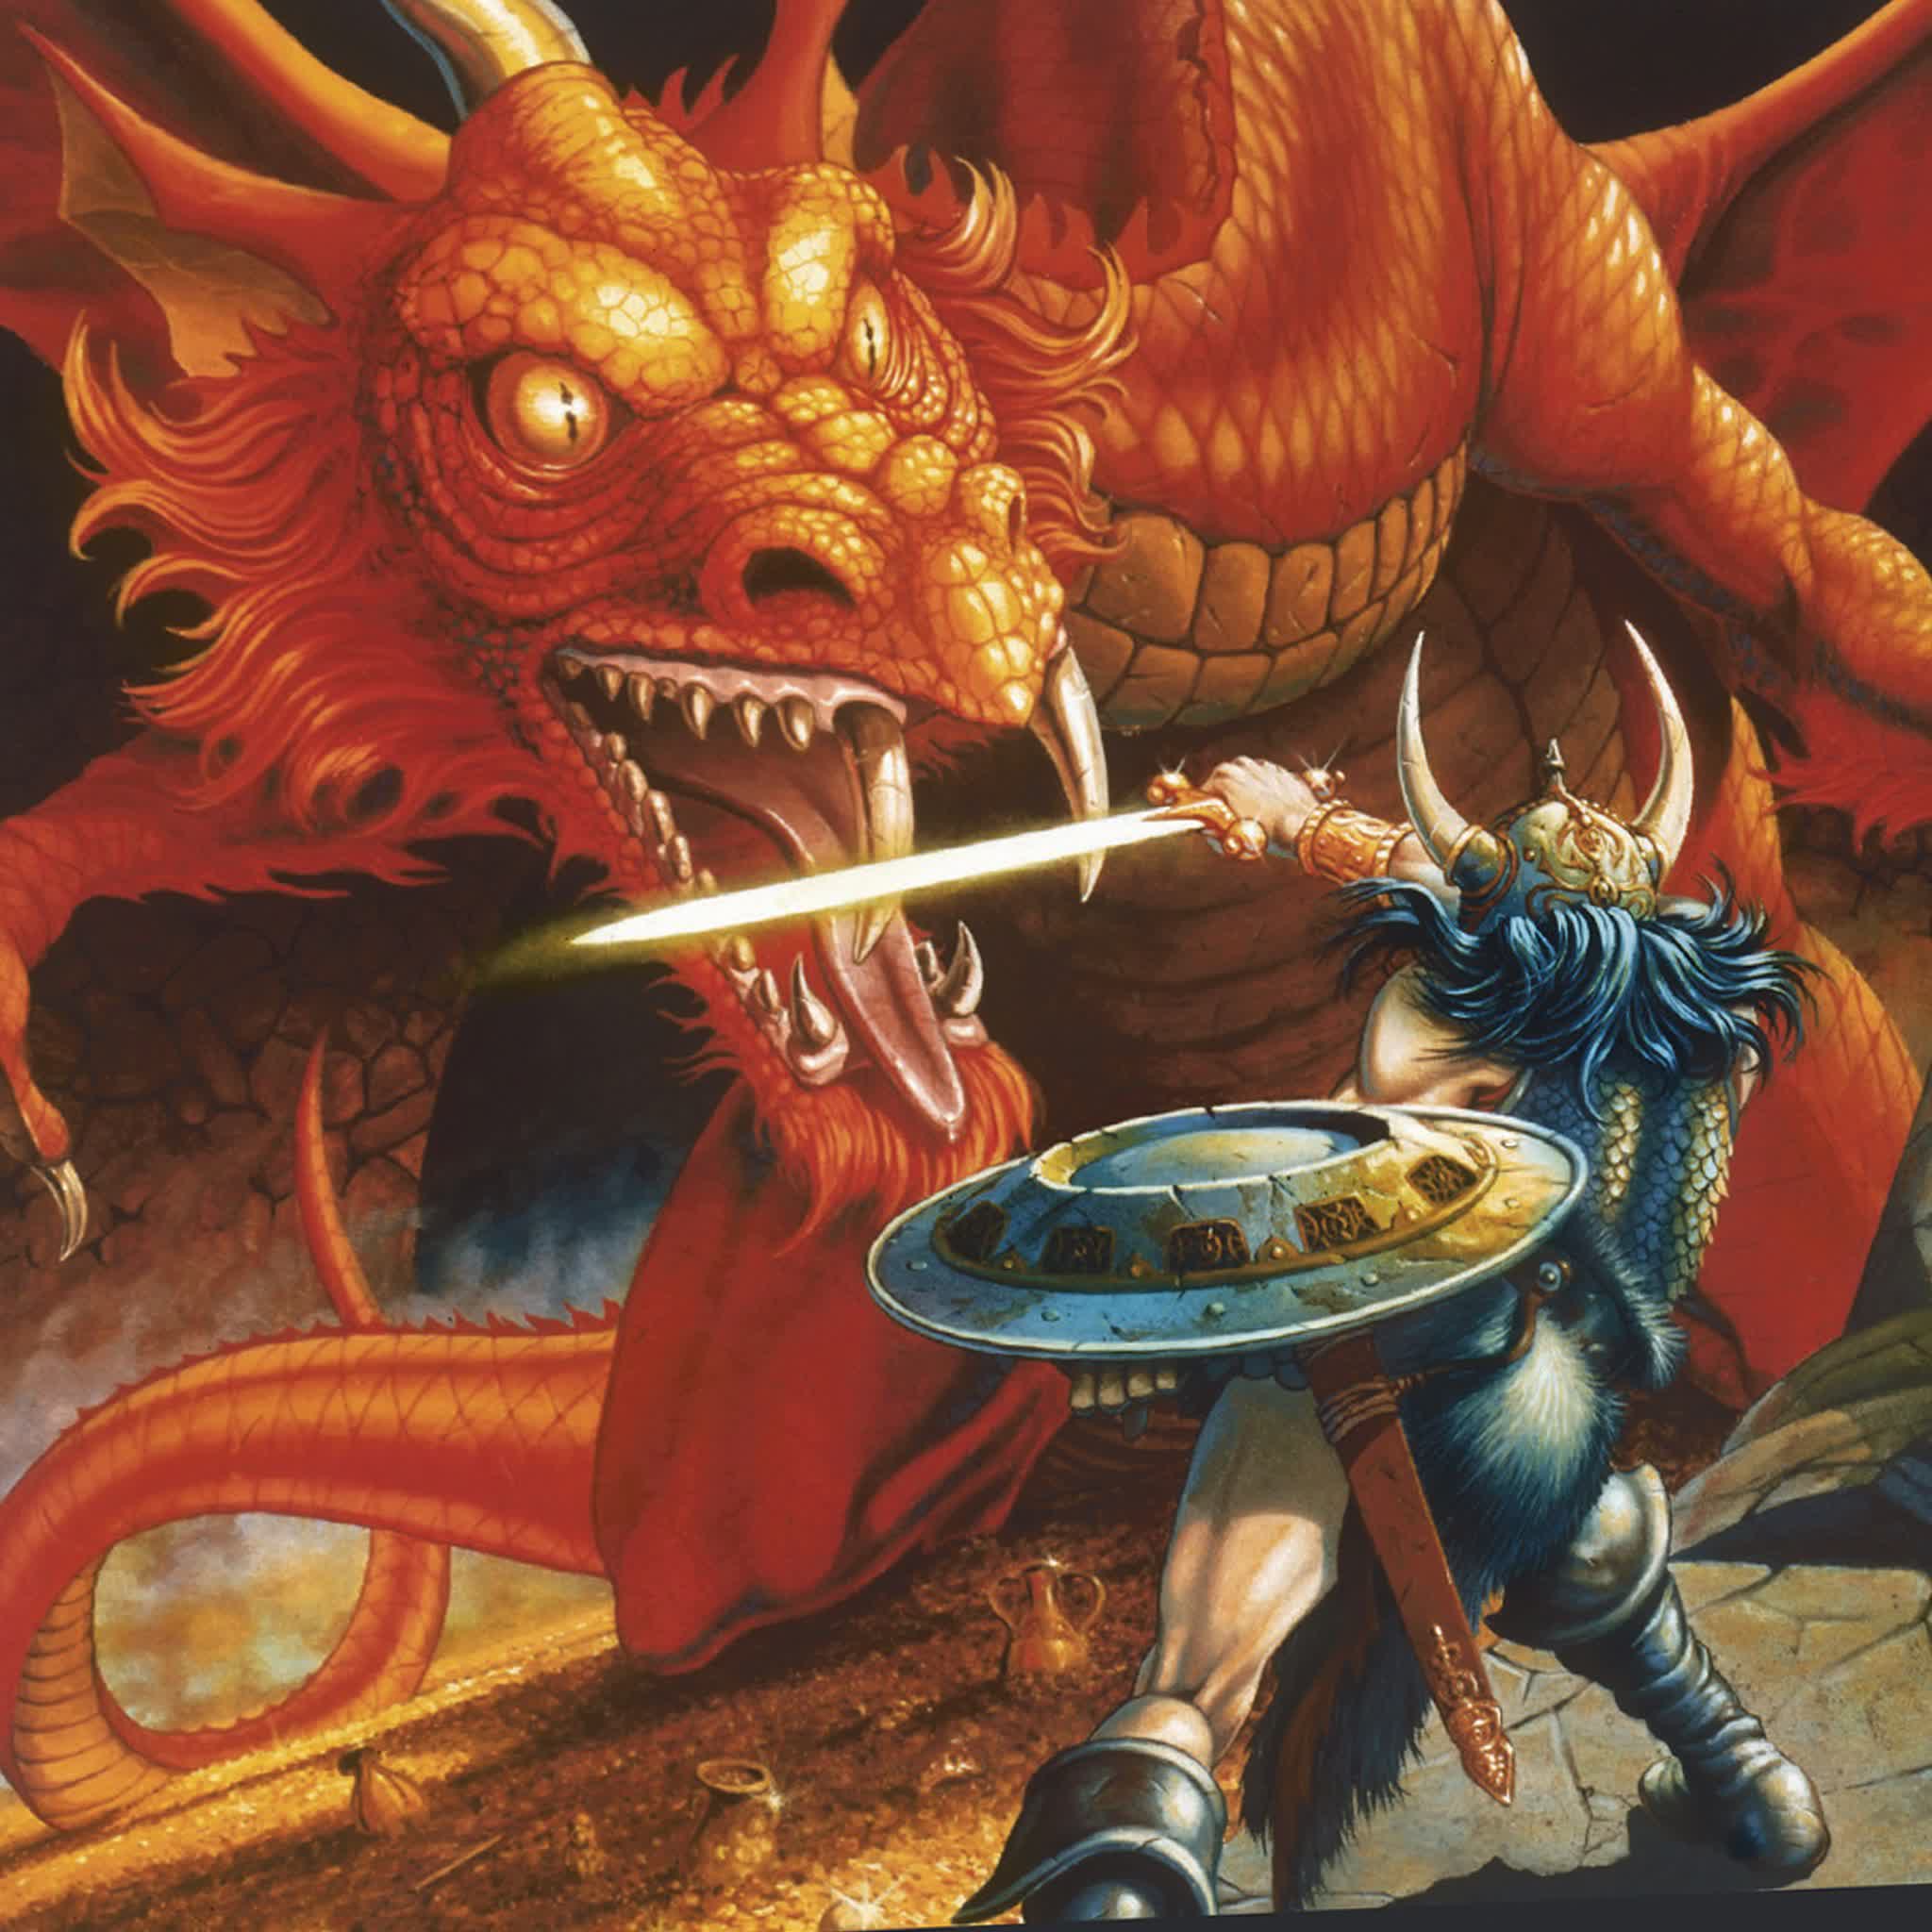 Wizards of the Coast parent company Hasbro to purchase D&D Beyond for $146.3 million